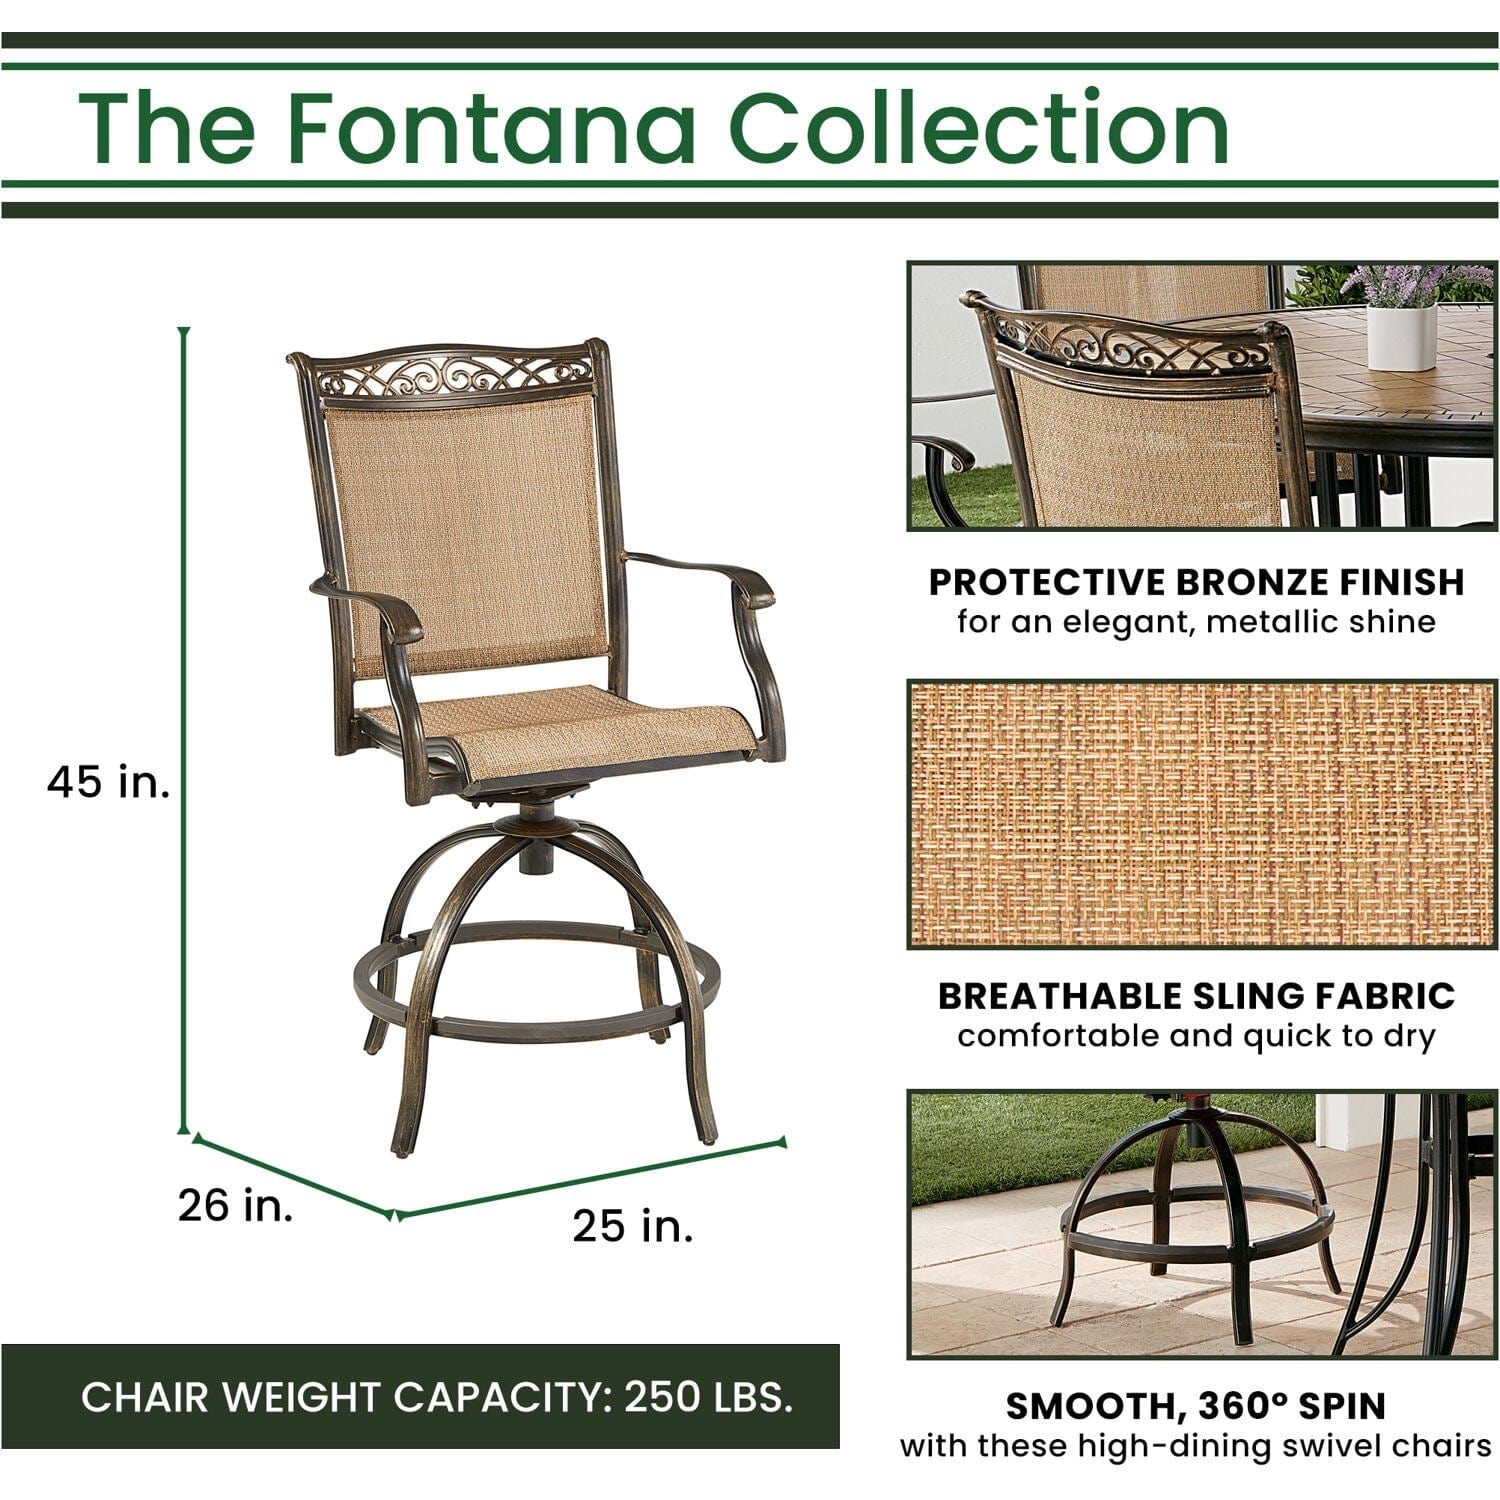 Hanover Outdoor Dining Set Hanover Fontana 5-Piece High-Dining Set in Tan with 4 Counter-Height Swivel Chairs and a 56-in. Cast-top Table | FNTDN5PCPBRC